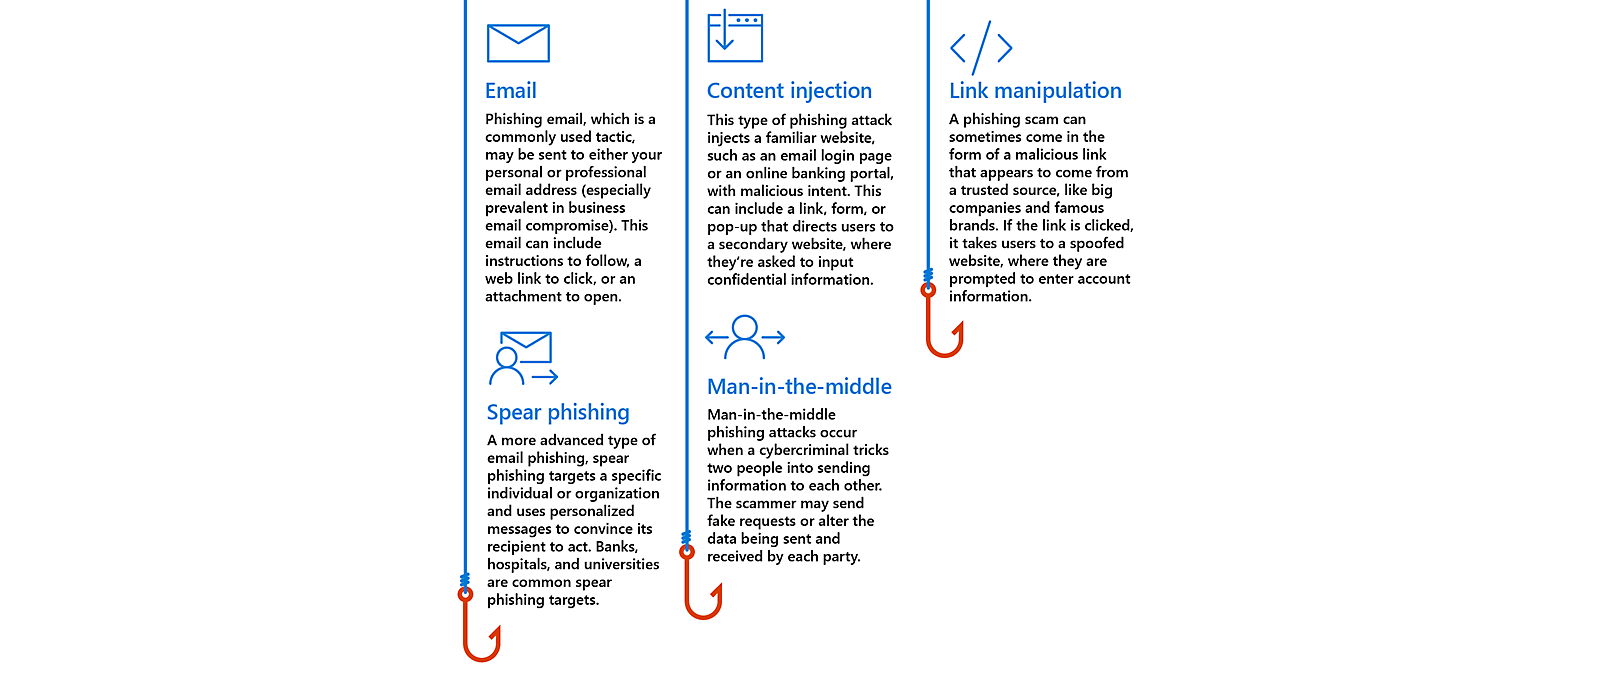 Image describing common phishing attacks (email, content injection, link manipulation, spear phishing and man-in-the-middle)